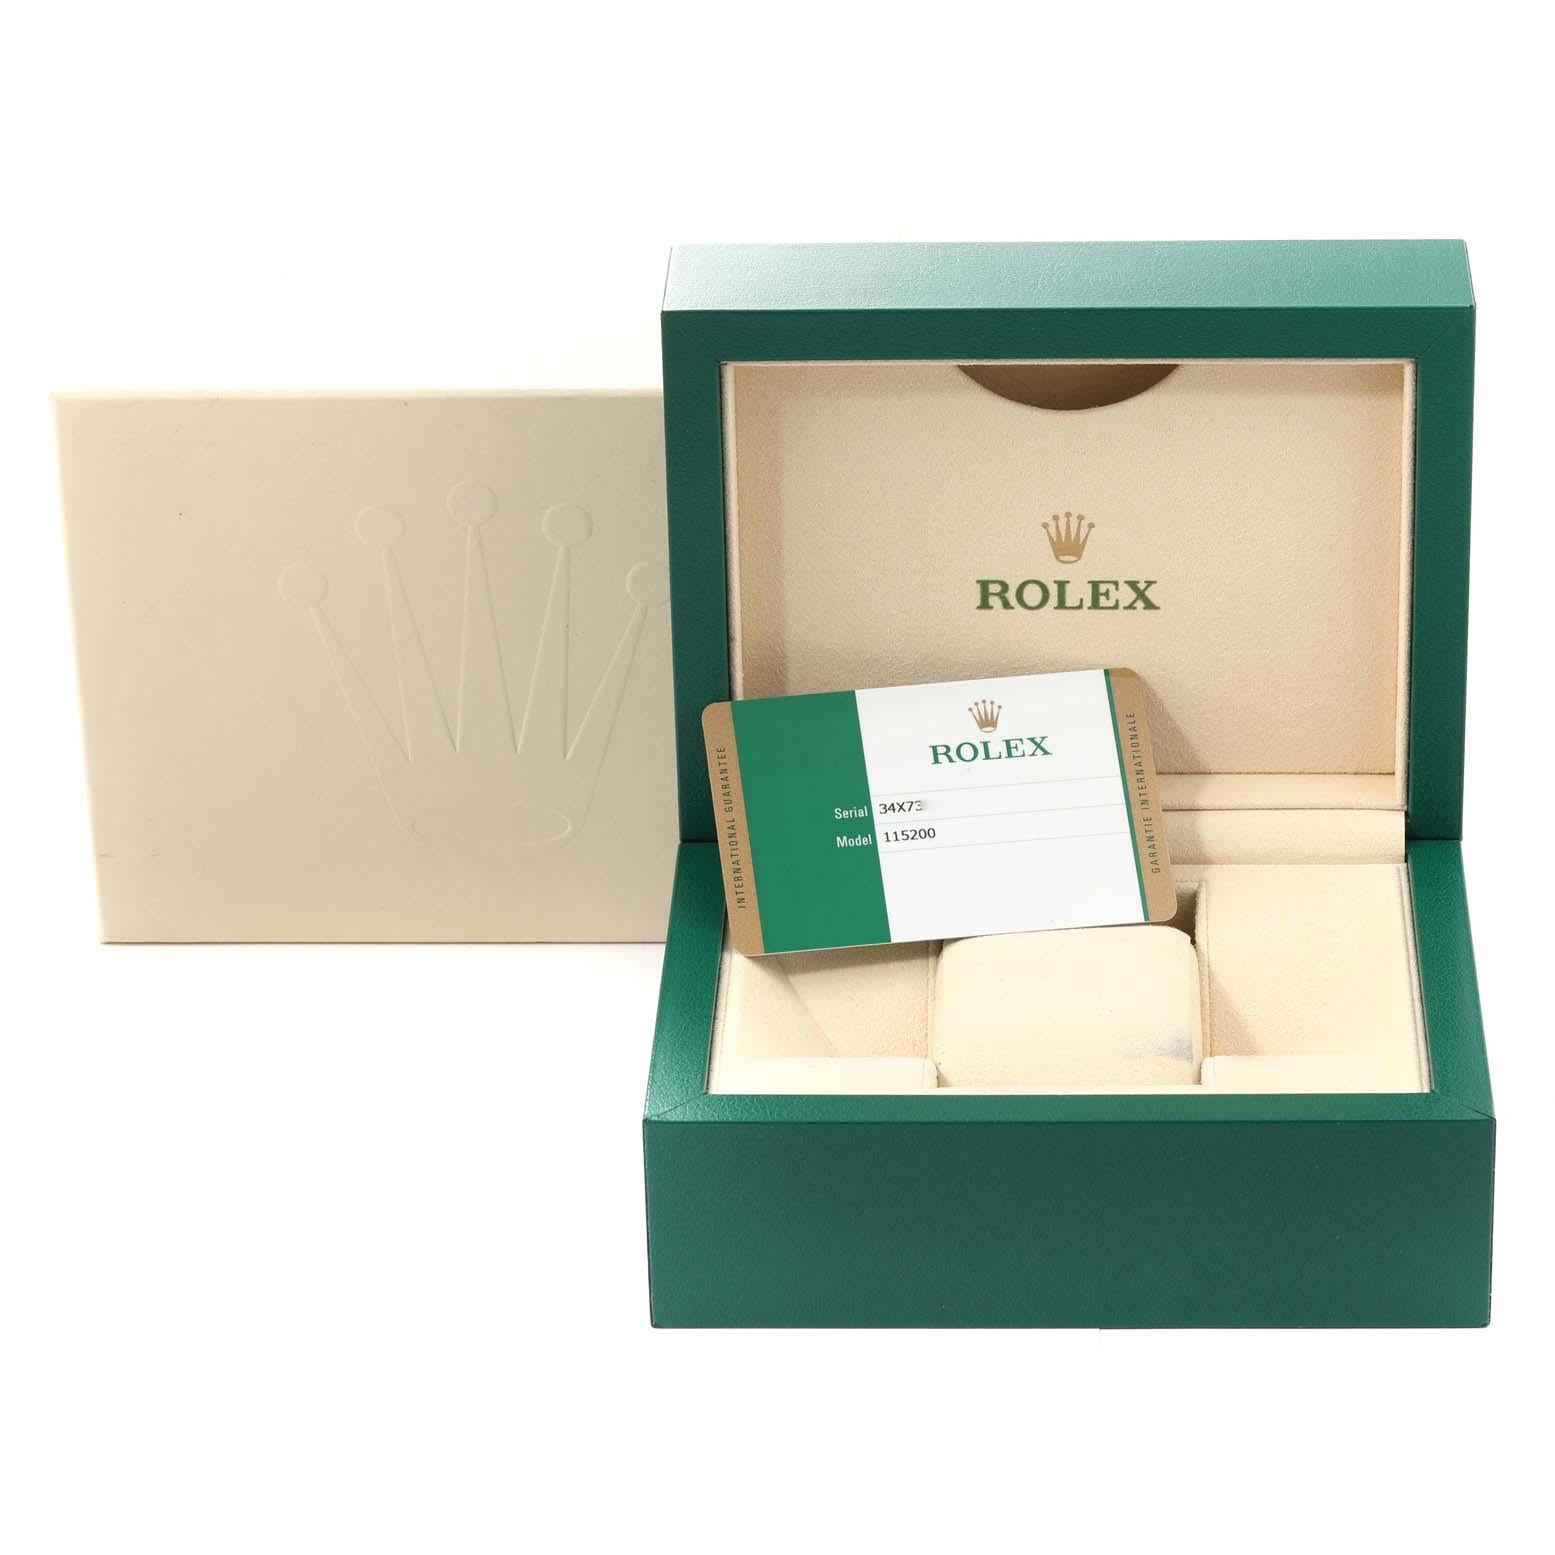 Rolex Date Stainless Steel Blue Dial Mens Watch 115200 Box Card For Sale 6